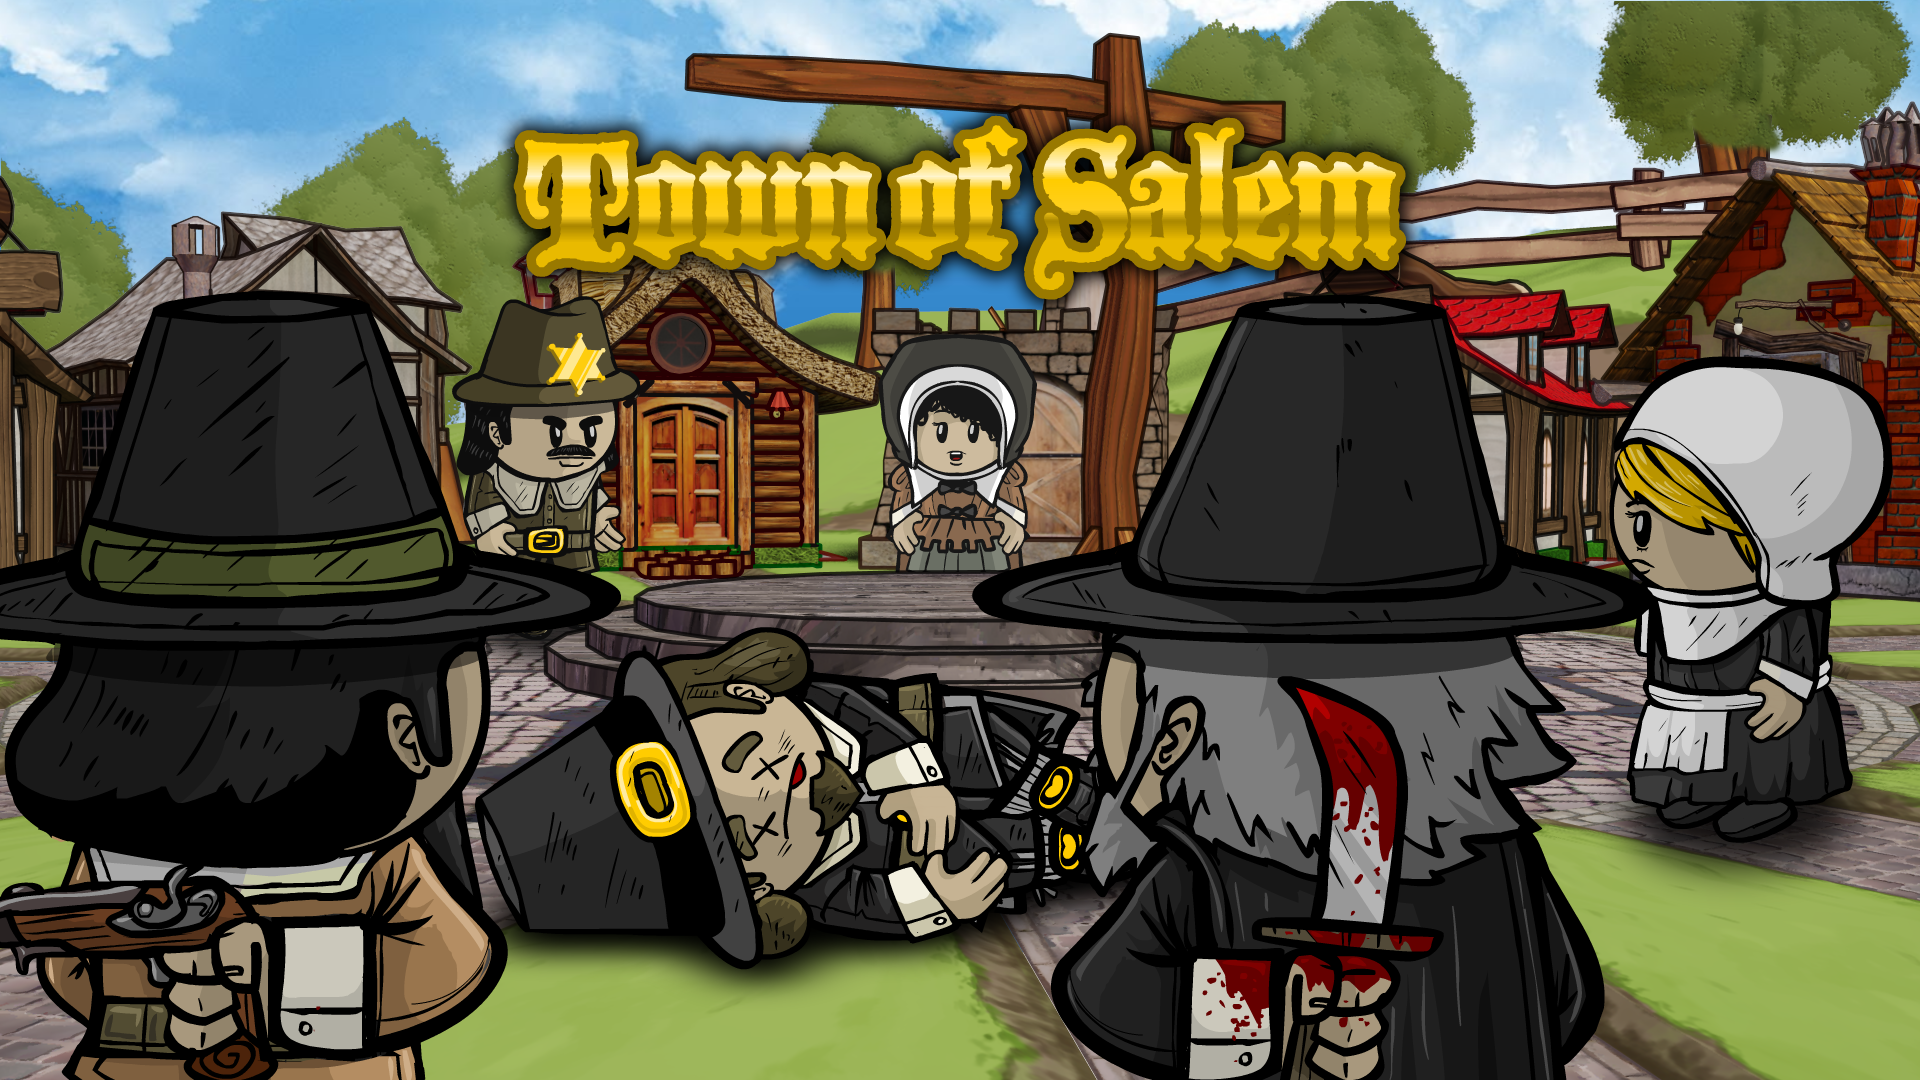 27% of Passwords From Town of Salem Breach Already Cracked